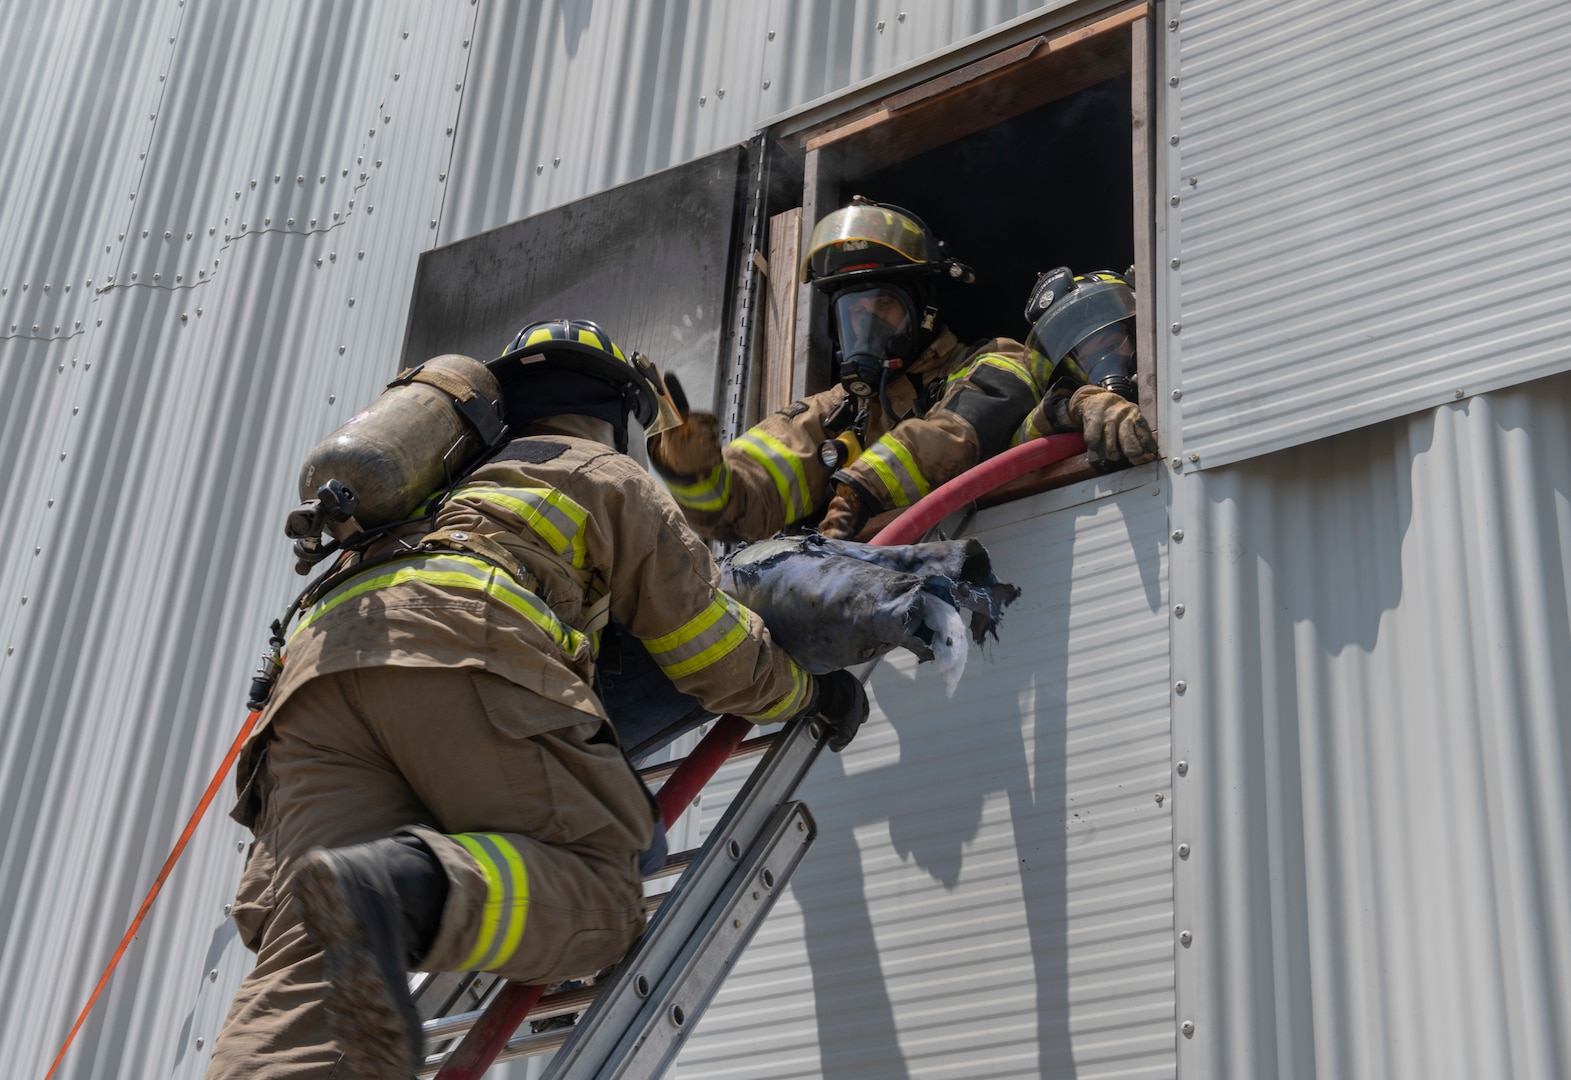 Joint Base San Antonio's 902nd Civil Engineer Squadron Fire Emergency Service members, and firefighters from Schertz and Cibolo fire departments, rescue a manikin from a building through a window during a live fire training exercise, April 14, 2021, at Joint Base San Antonio-Randolph, Texas.